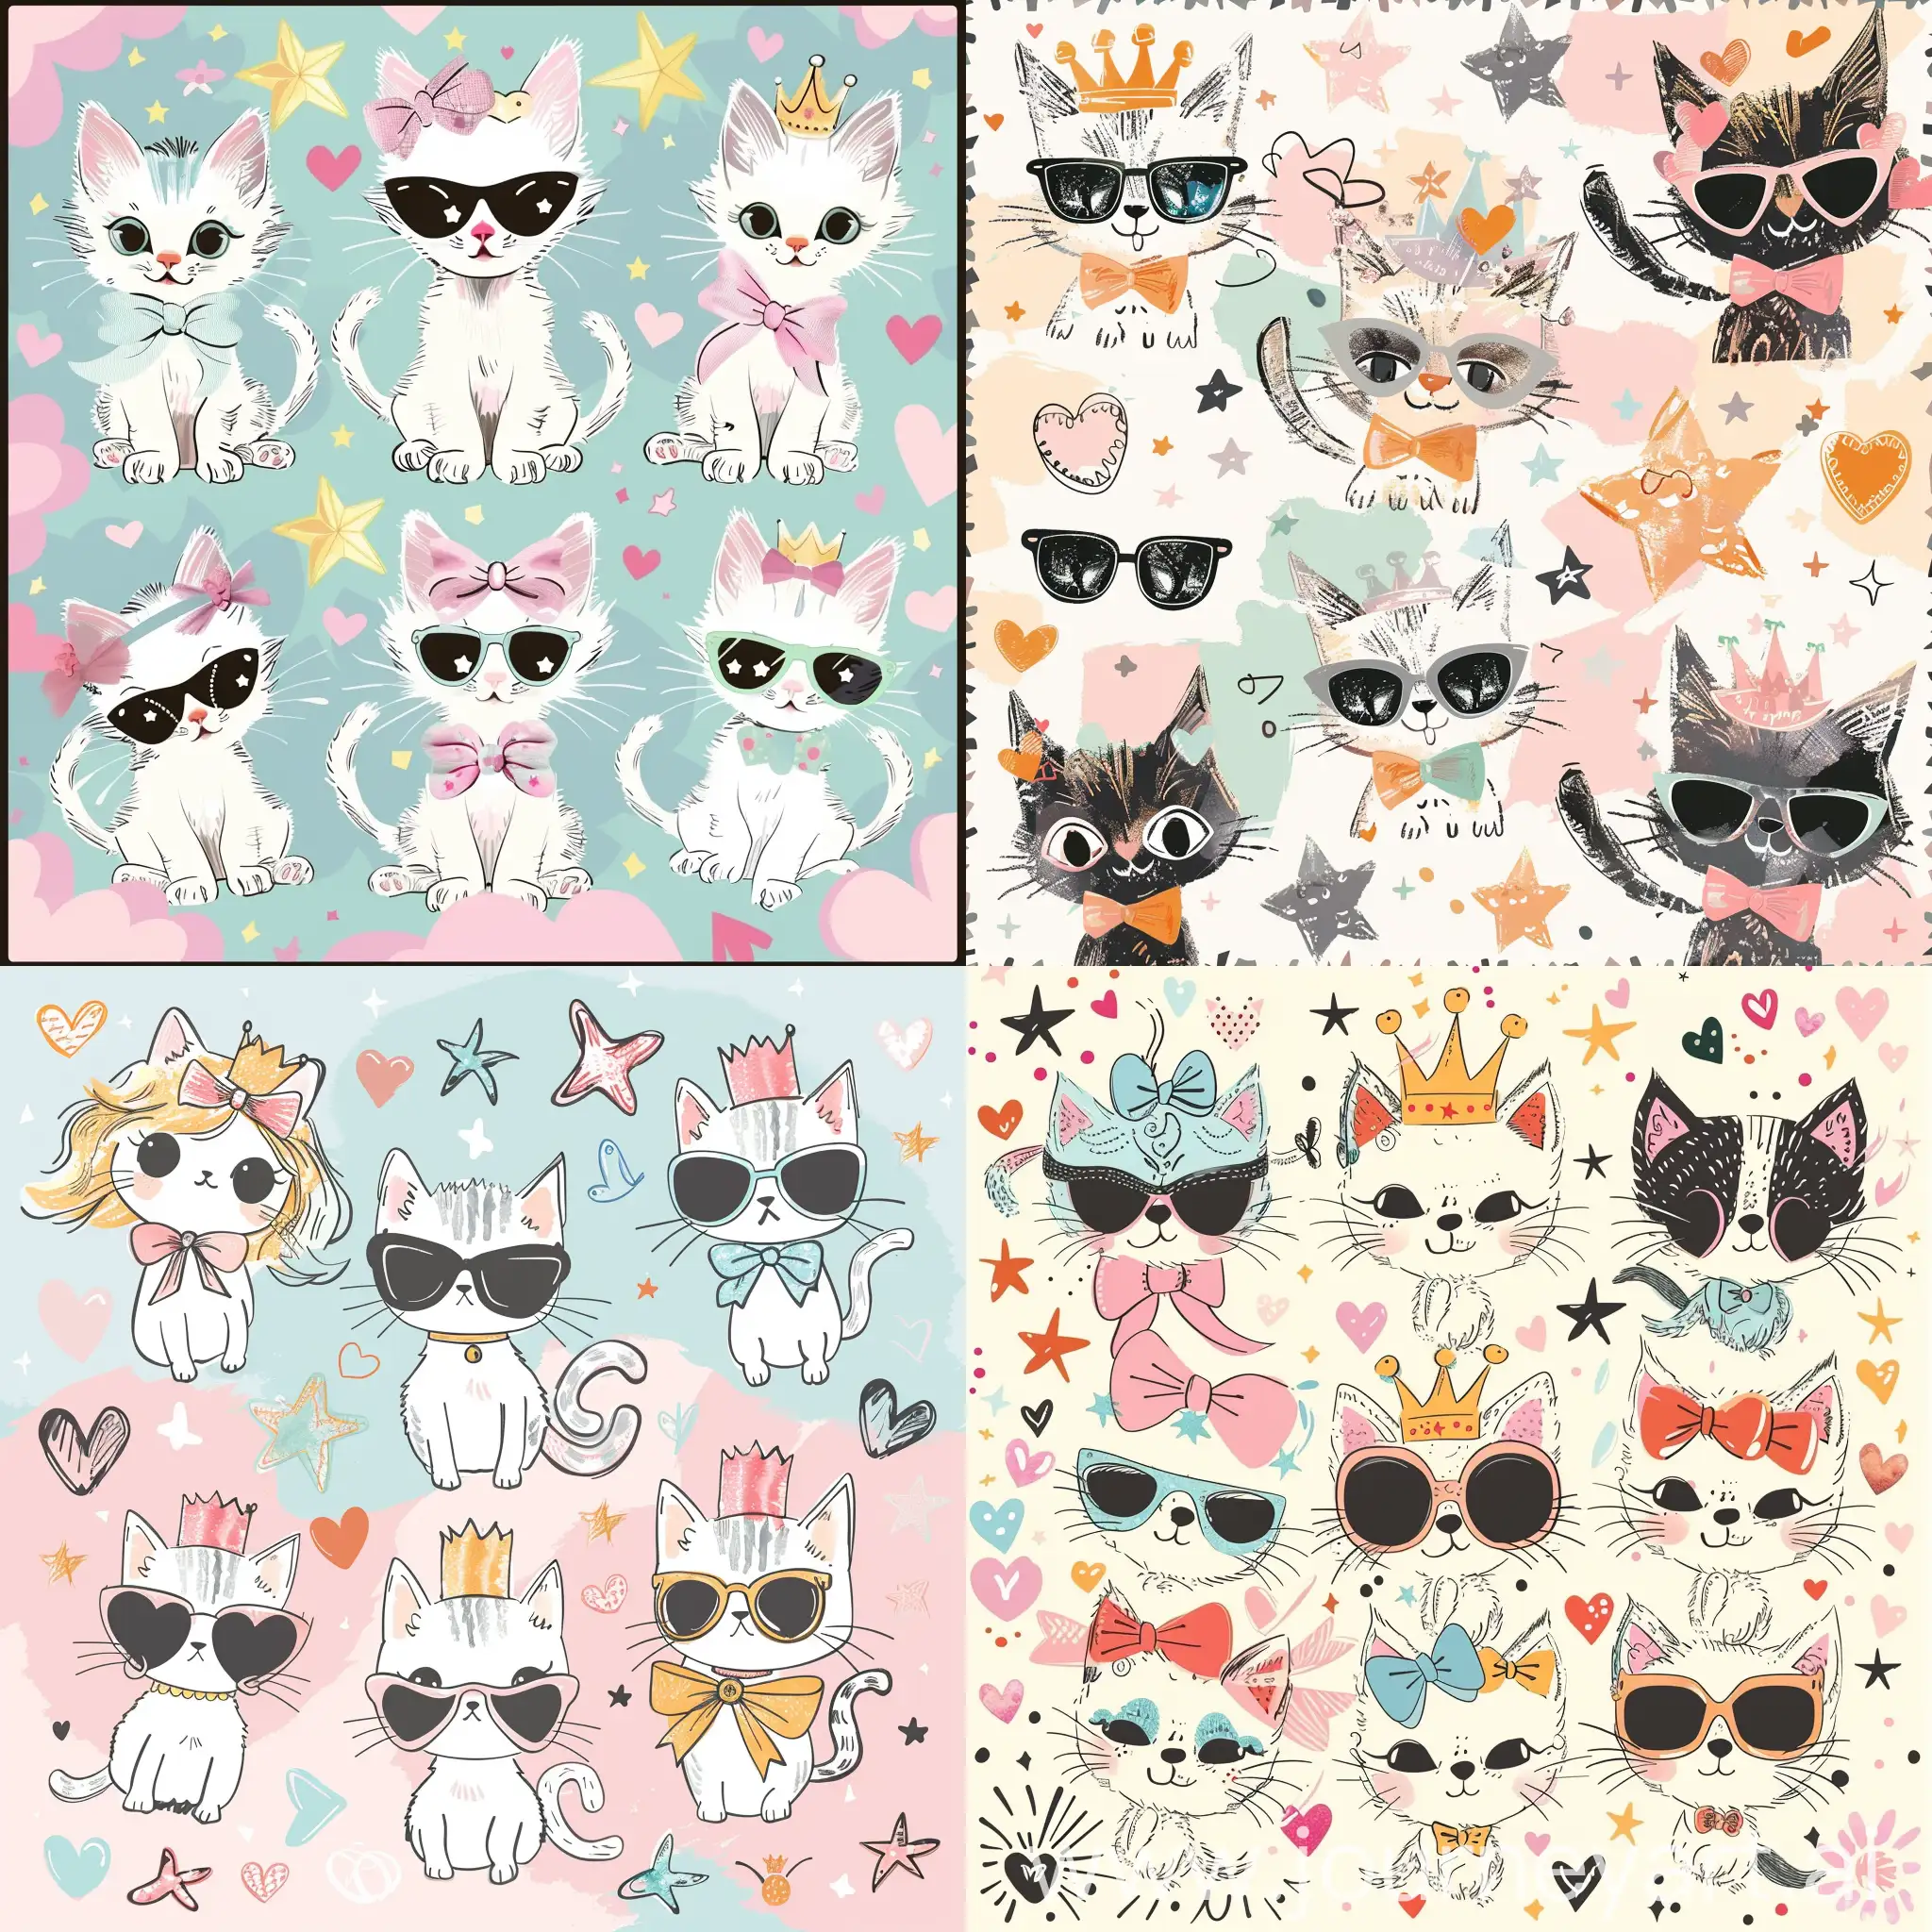 Chic-Pastel-Background-with-CoquetteInspired-Kittens-and-Girly-Motifs